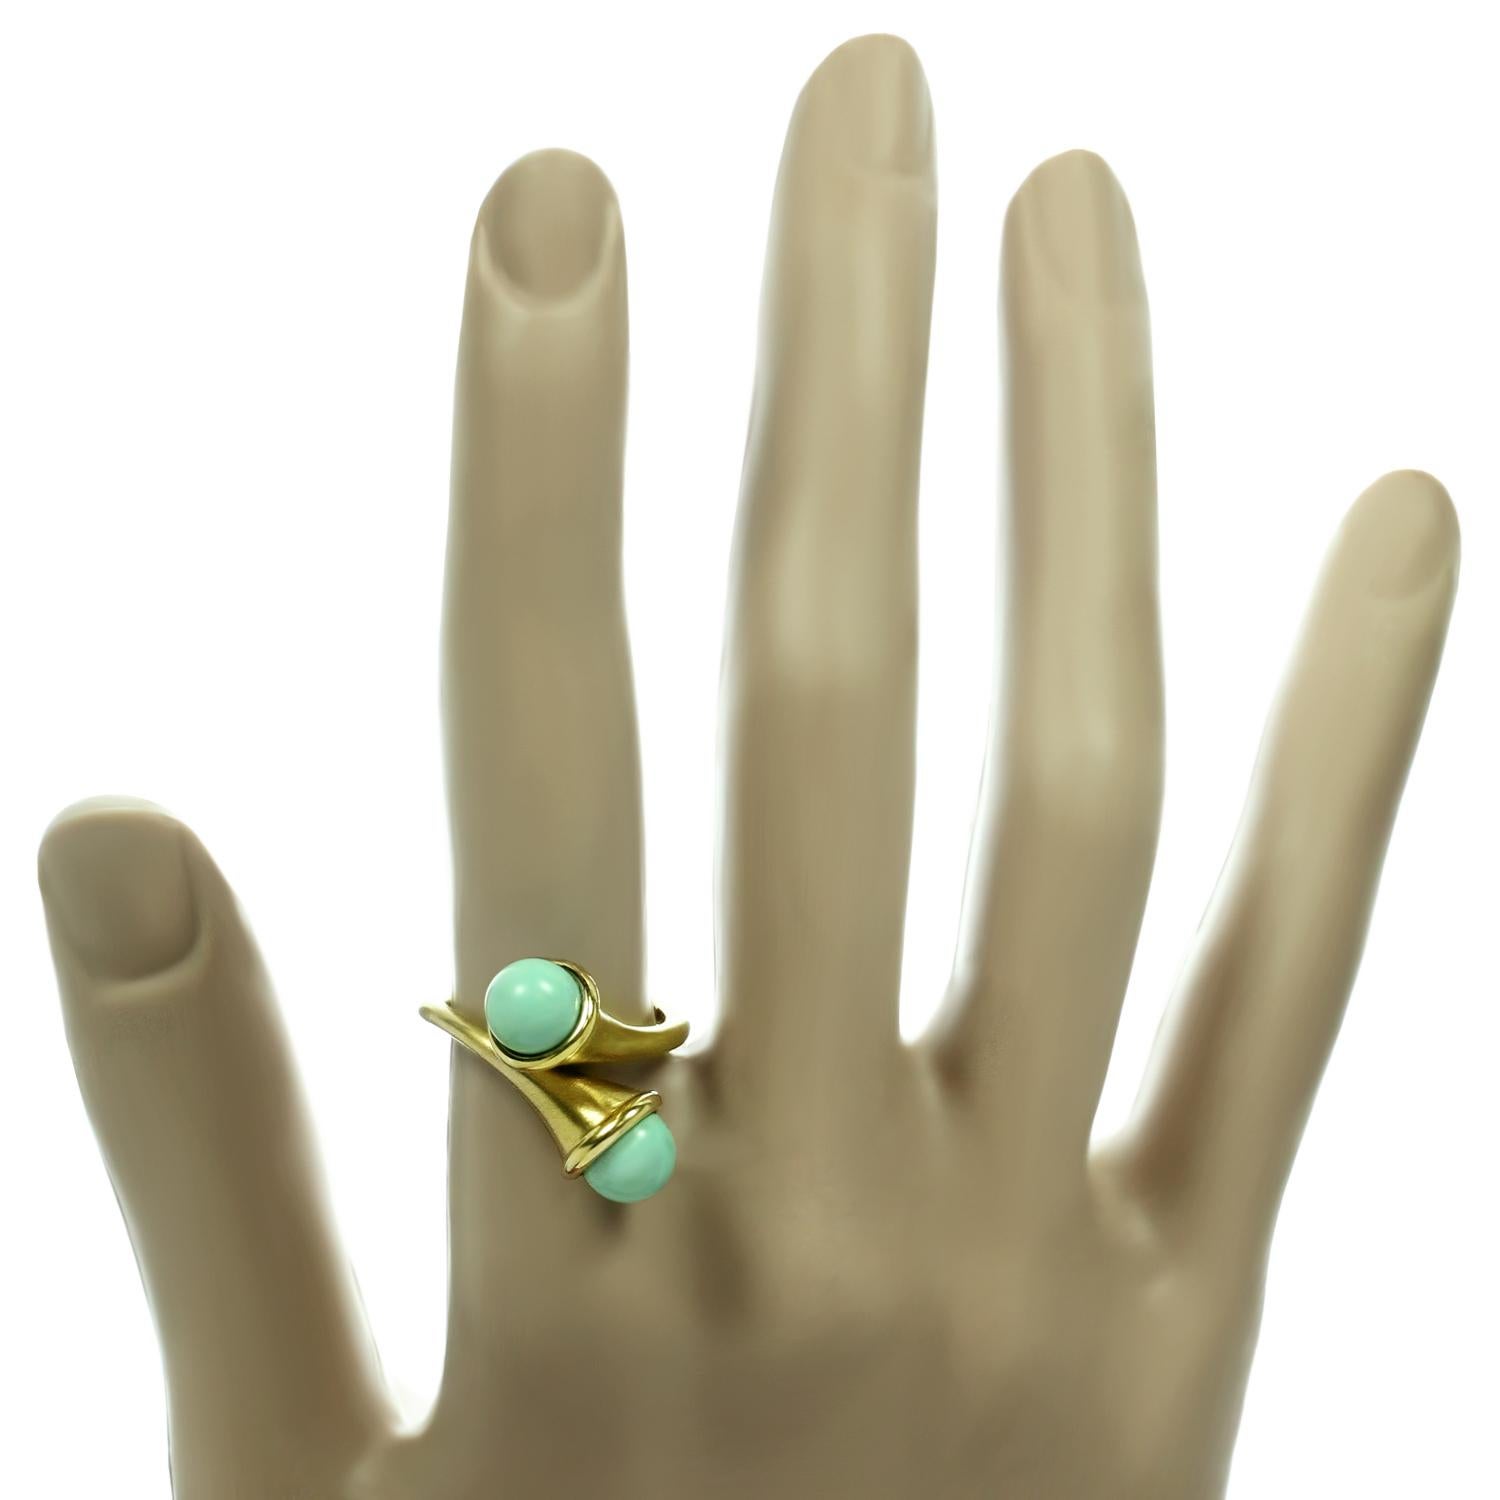 Women's Angela Cummings Turquoise Yellow Gold Earrings and Ring Set